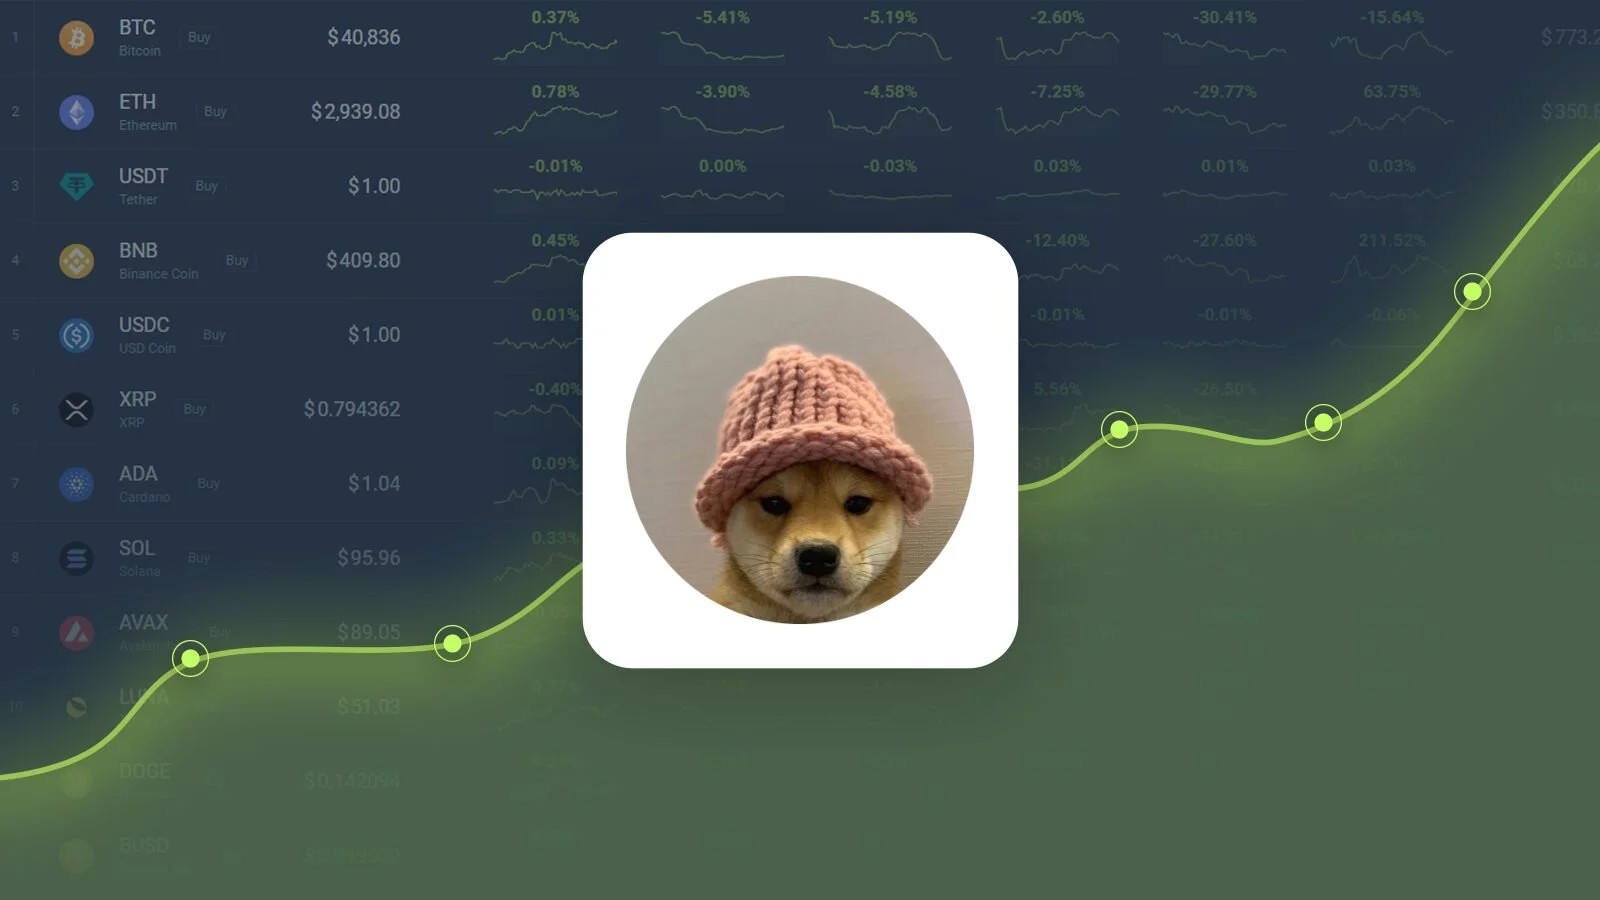 DogWifHat Claims ‘Top 3 Memecoin’ Spot: Can WIF Breach $3 Next?